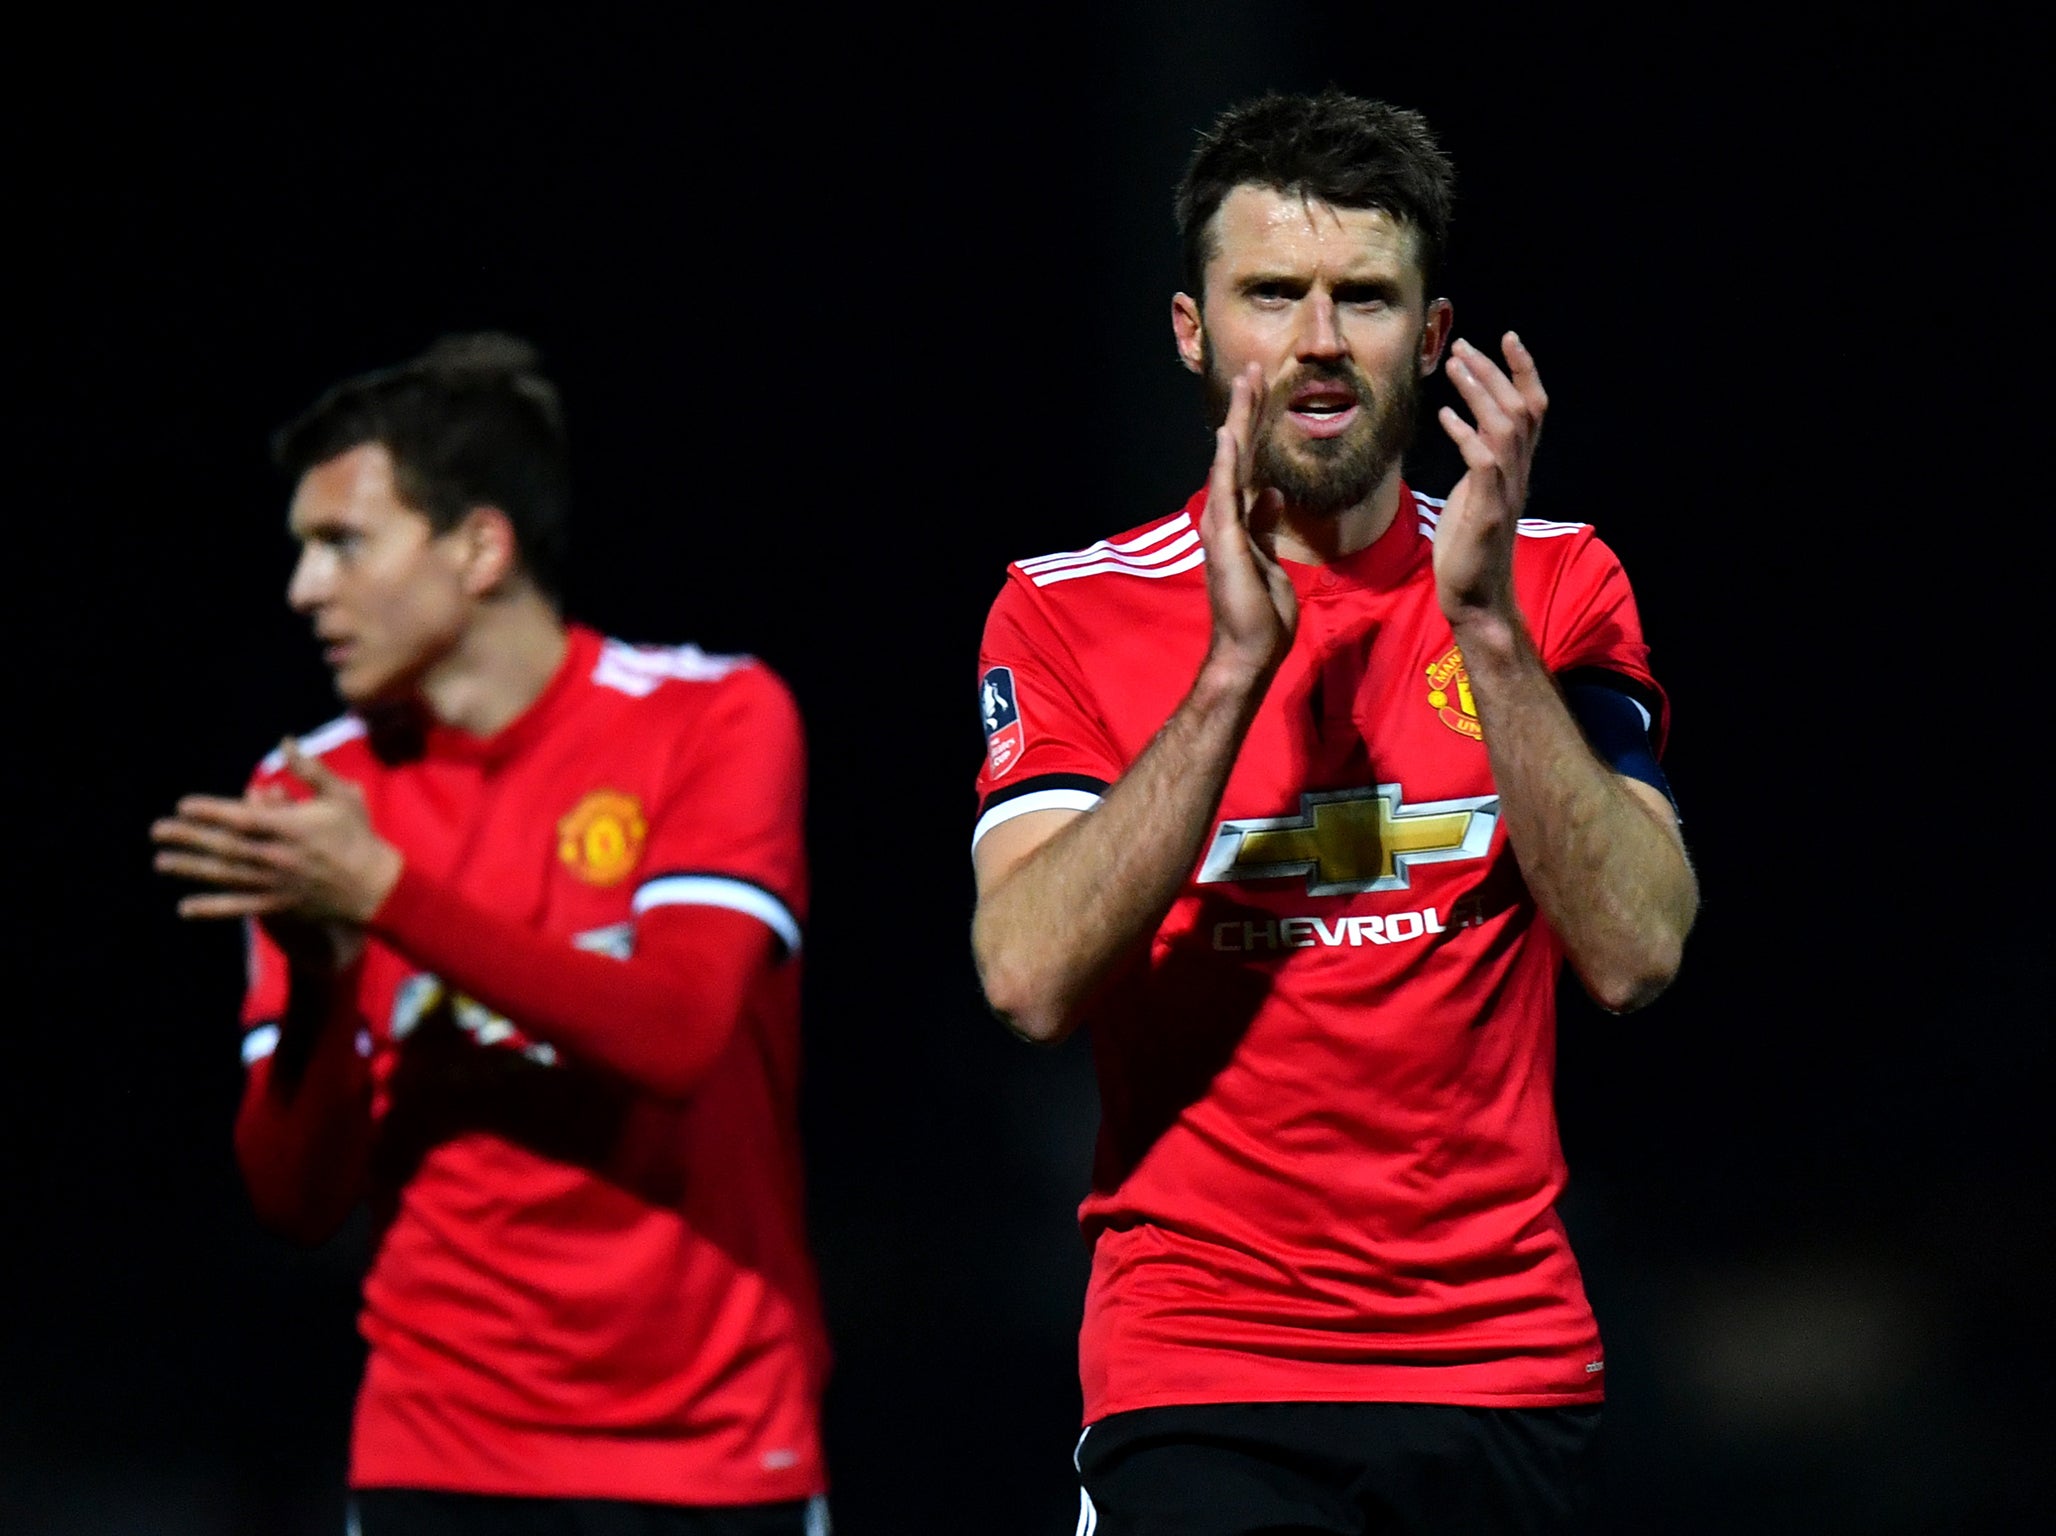 Michael Carrick is set to retire at the end of the season